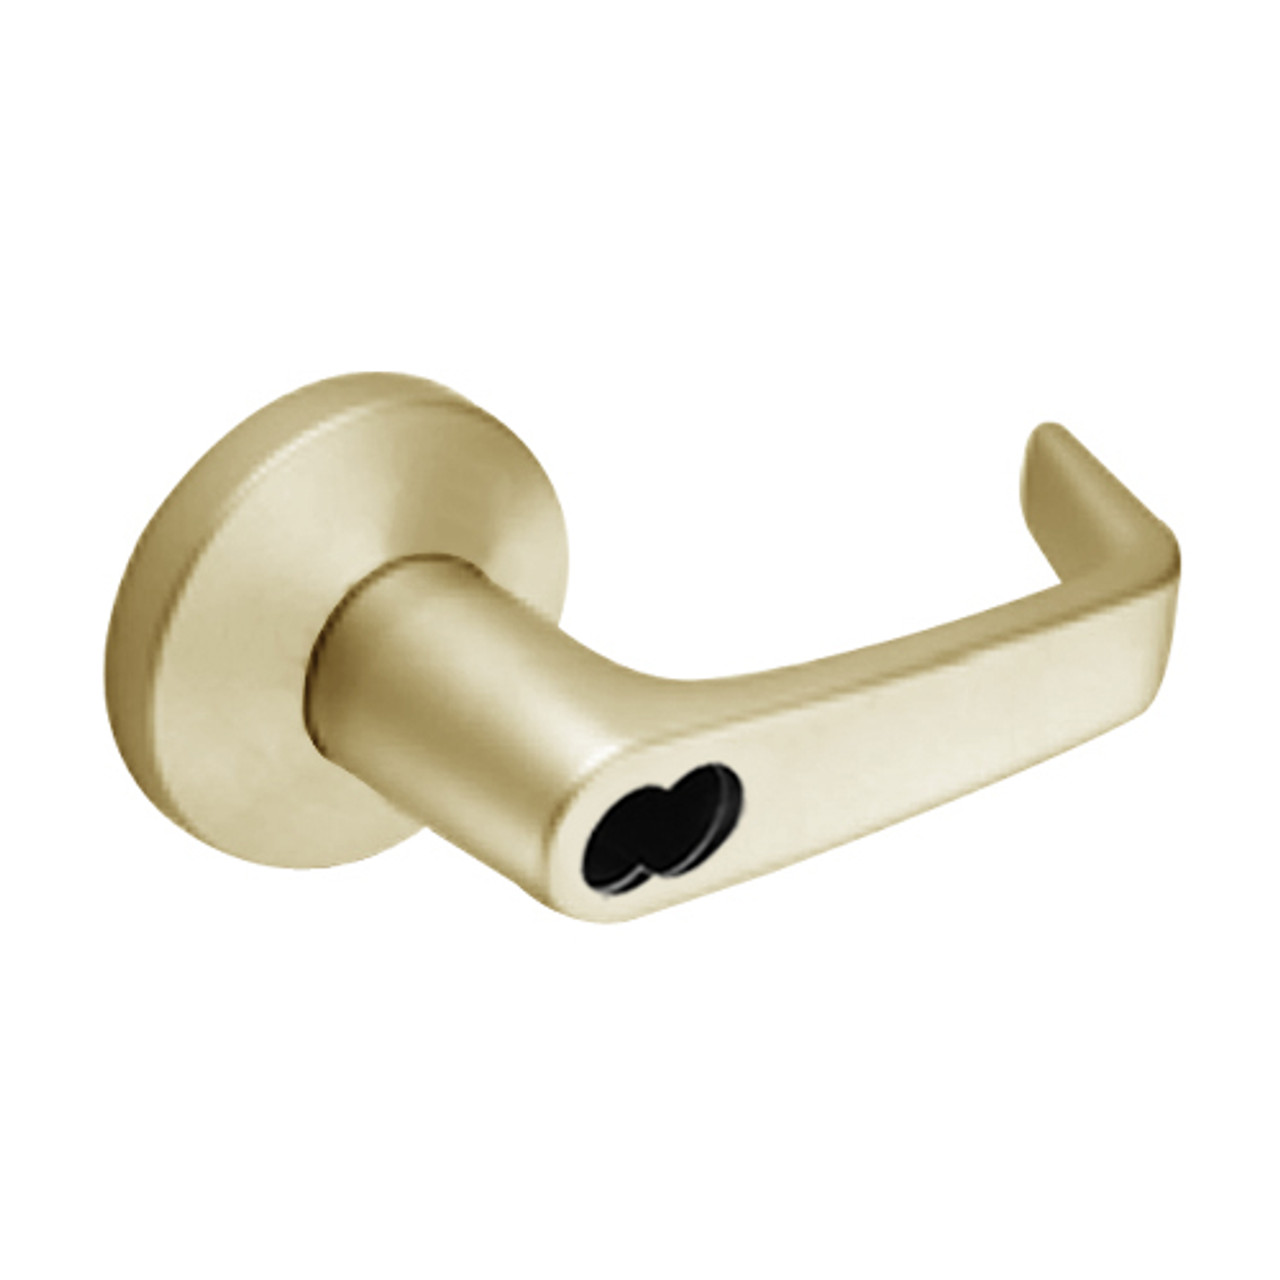 9K57E15KS3606 Best 9K Series Service Station Cylindrical Lever Locks with Contour Angle with Return Lever Design Accept 7 Pin Best Core in Satin Brass